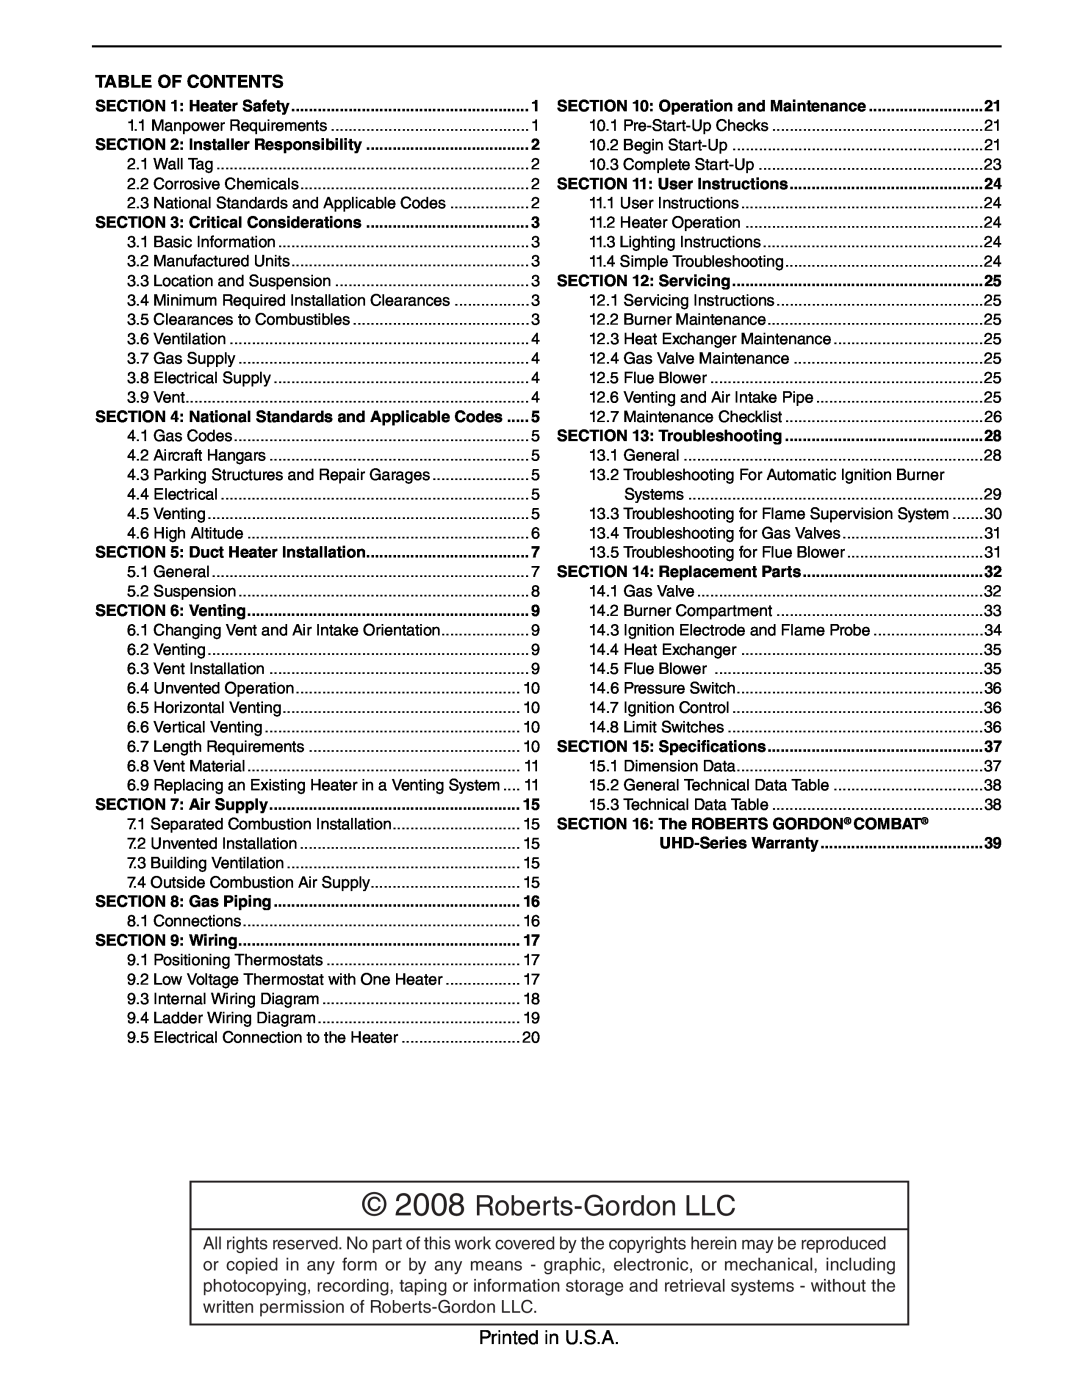 Roberts Gorden UHD[X][S][R] 350, UHD[X][S][R] 300, UHD[X][S][R] 250 Roberts-GordonLLC, Printed in U.S.A, Table Of Contents 